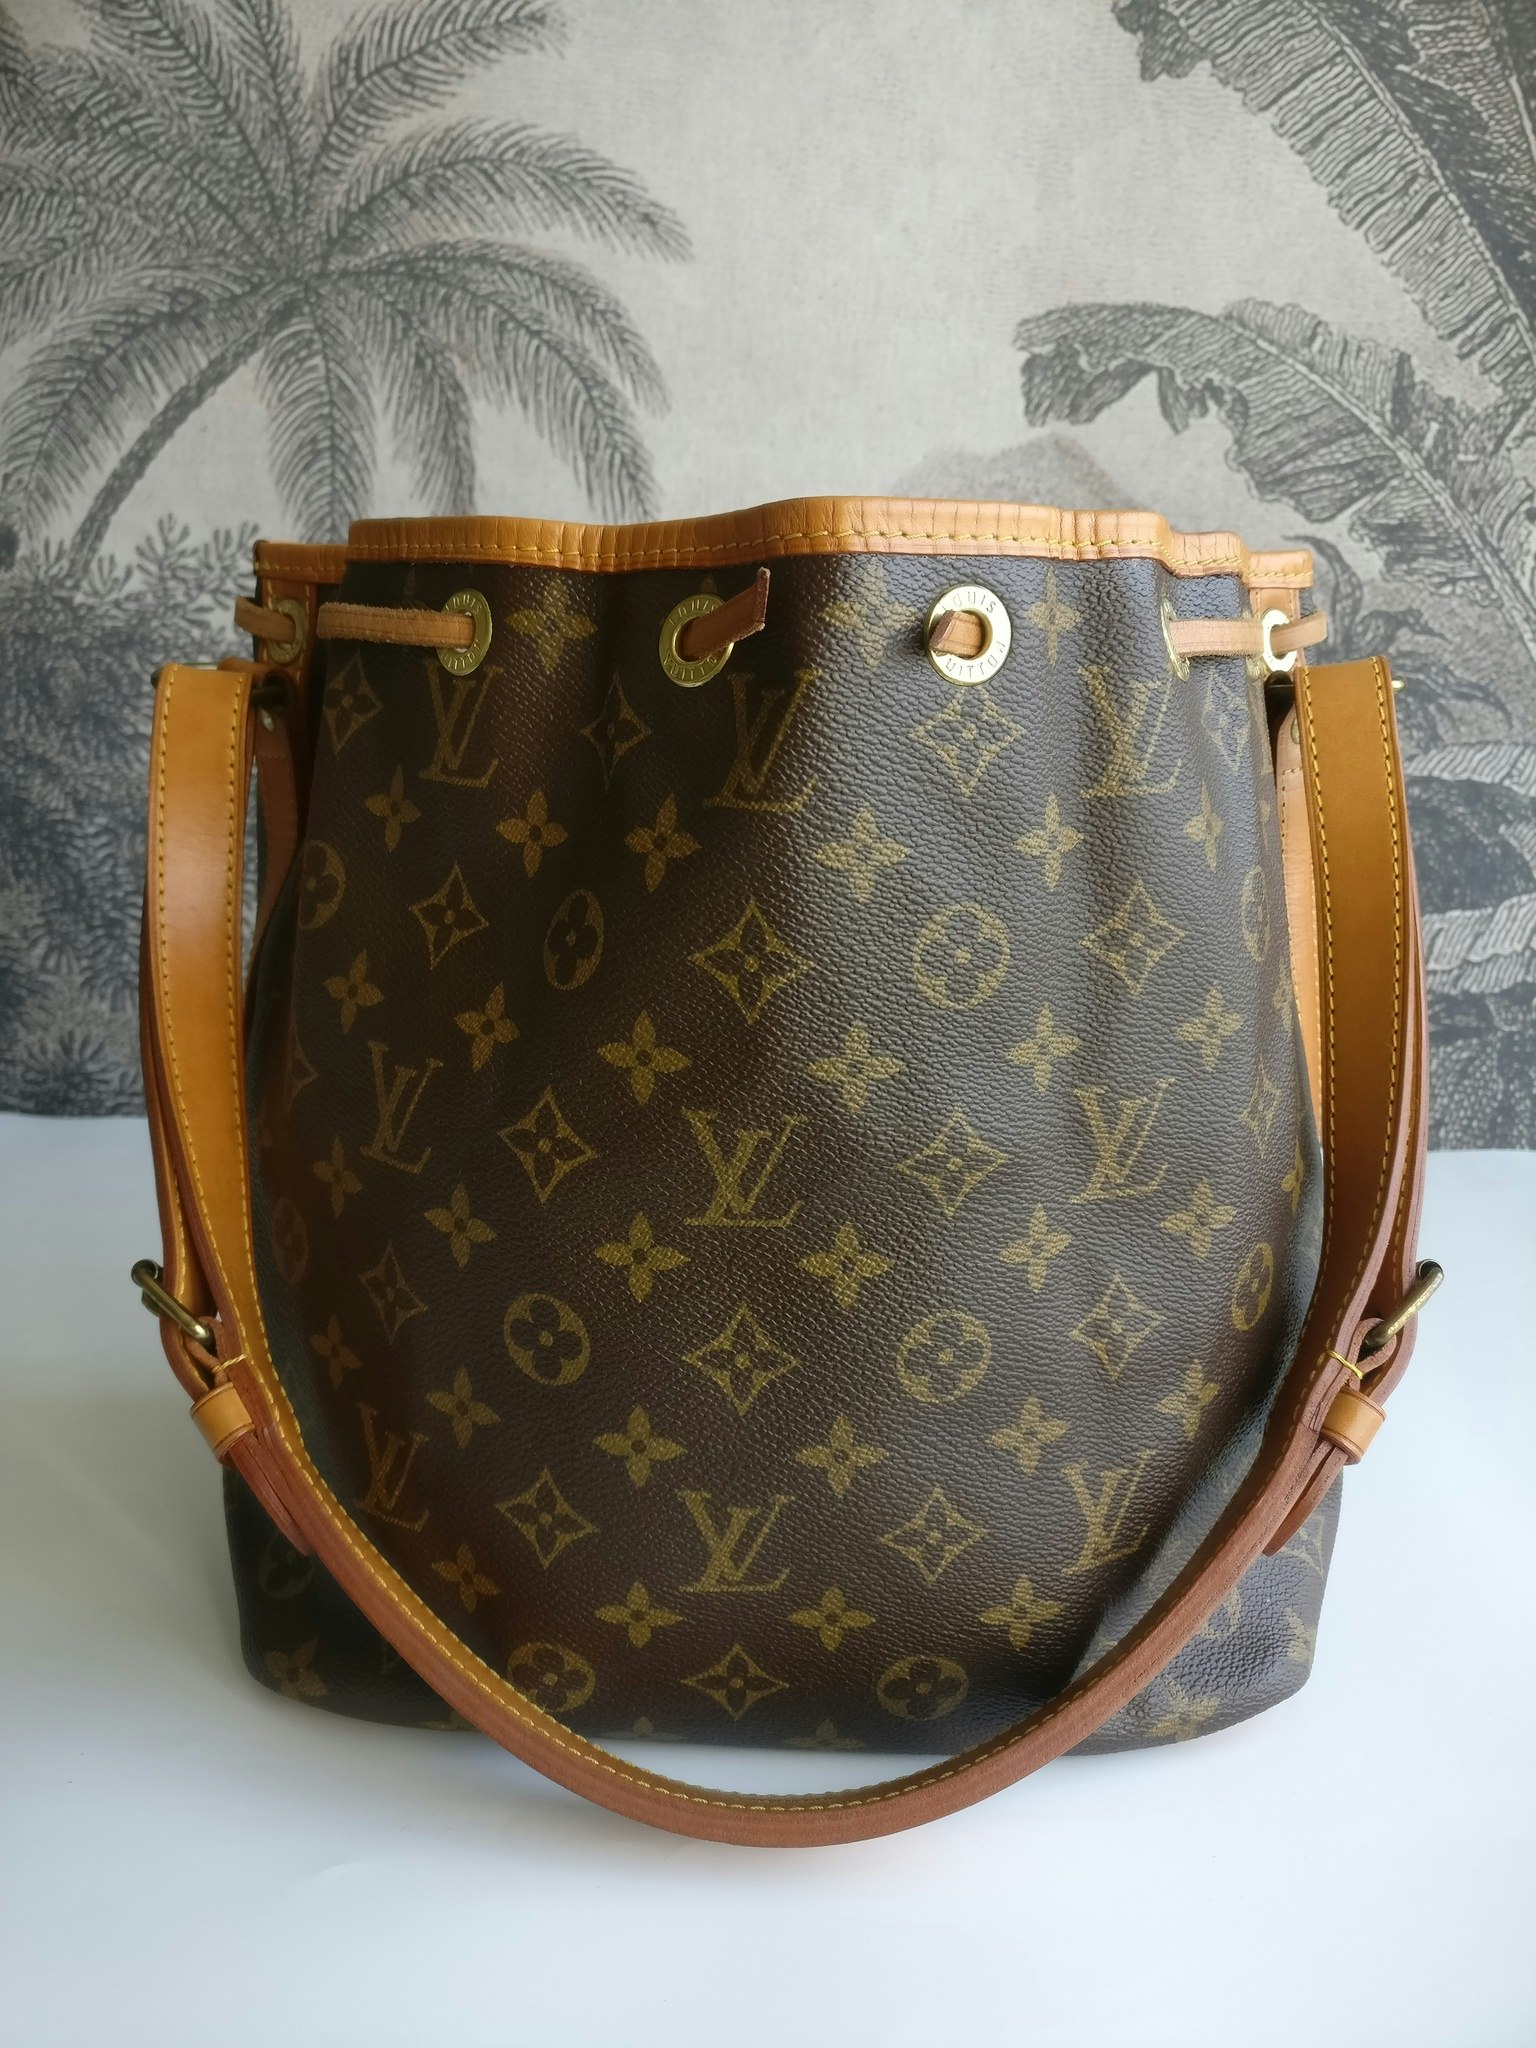 Buy Free Shipping Authentic Pre-owned Louis Vuitton LV Monogram Rayures  Striped Petit Noe Shoulder Bag M40564 211078 from Japan - Buy authentic  Plus exclusive items from Japan